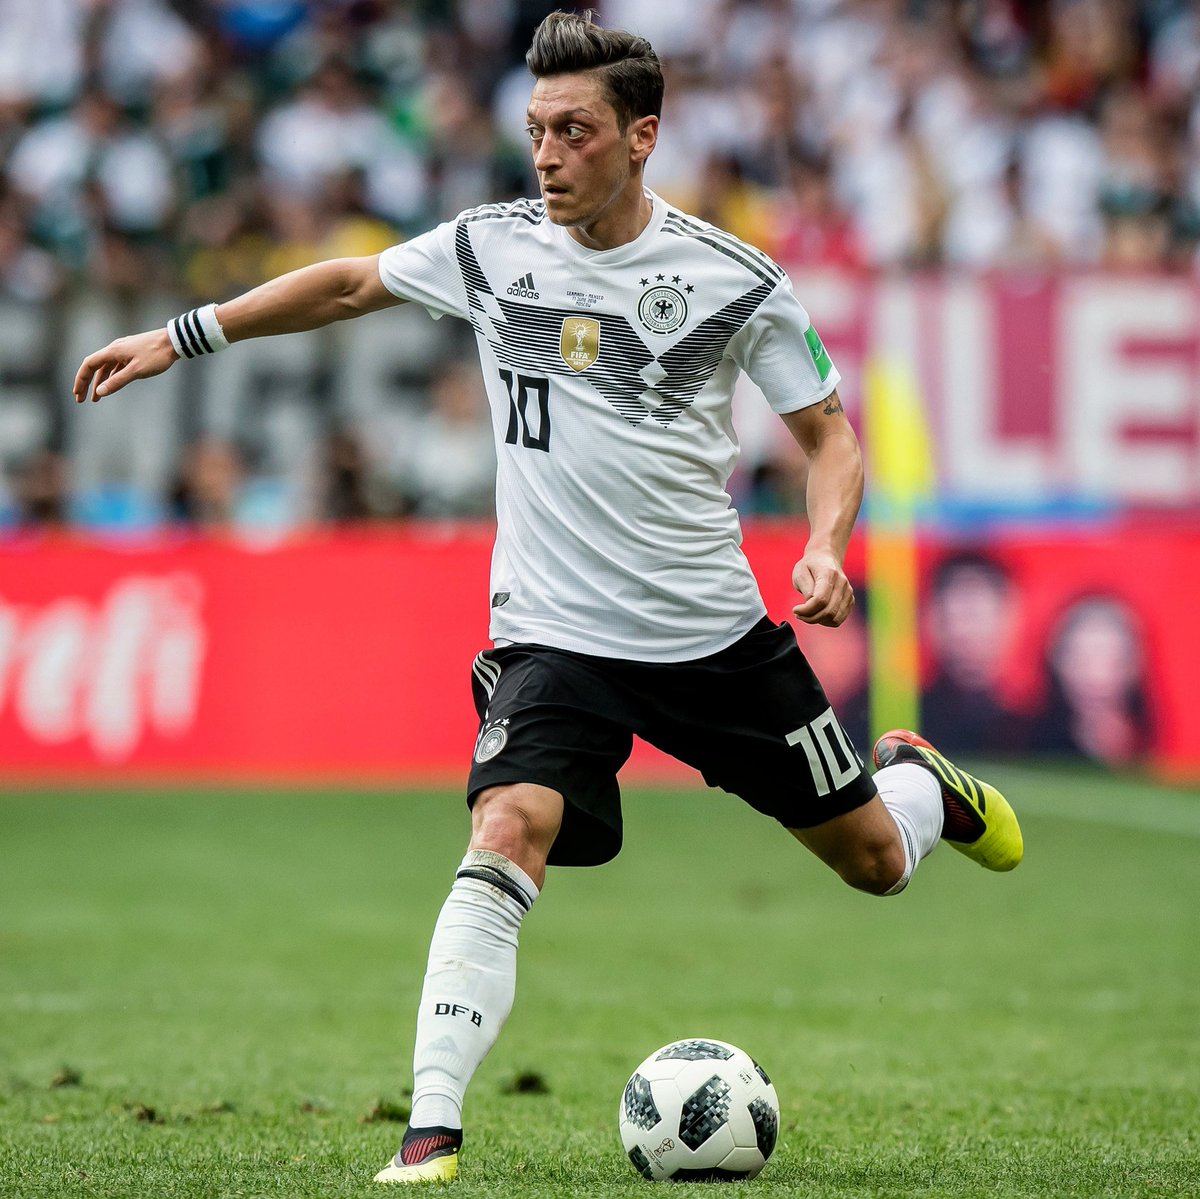 Sure, we made too many mistakes yesterday. We have to improve now. The match against Sweden will already be our first final. 🇩🇪⚽️🇸🇪 #M1Ö #Worldcup #Russia2018